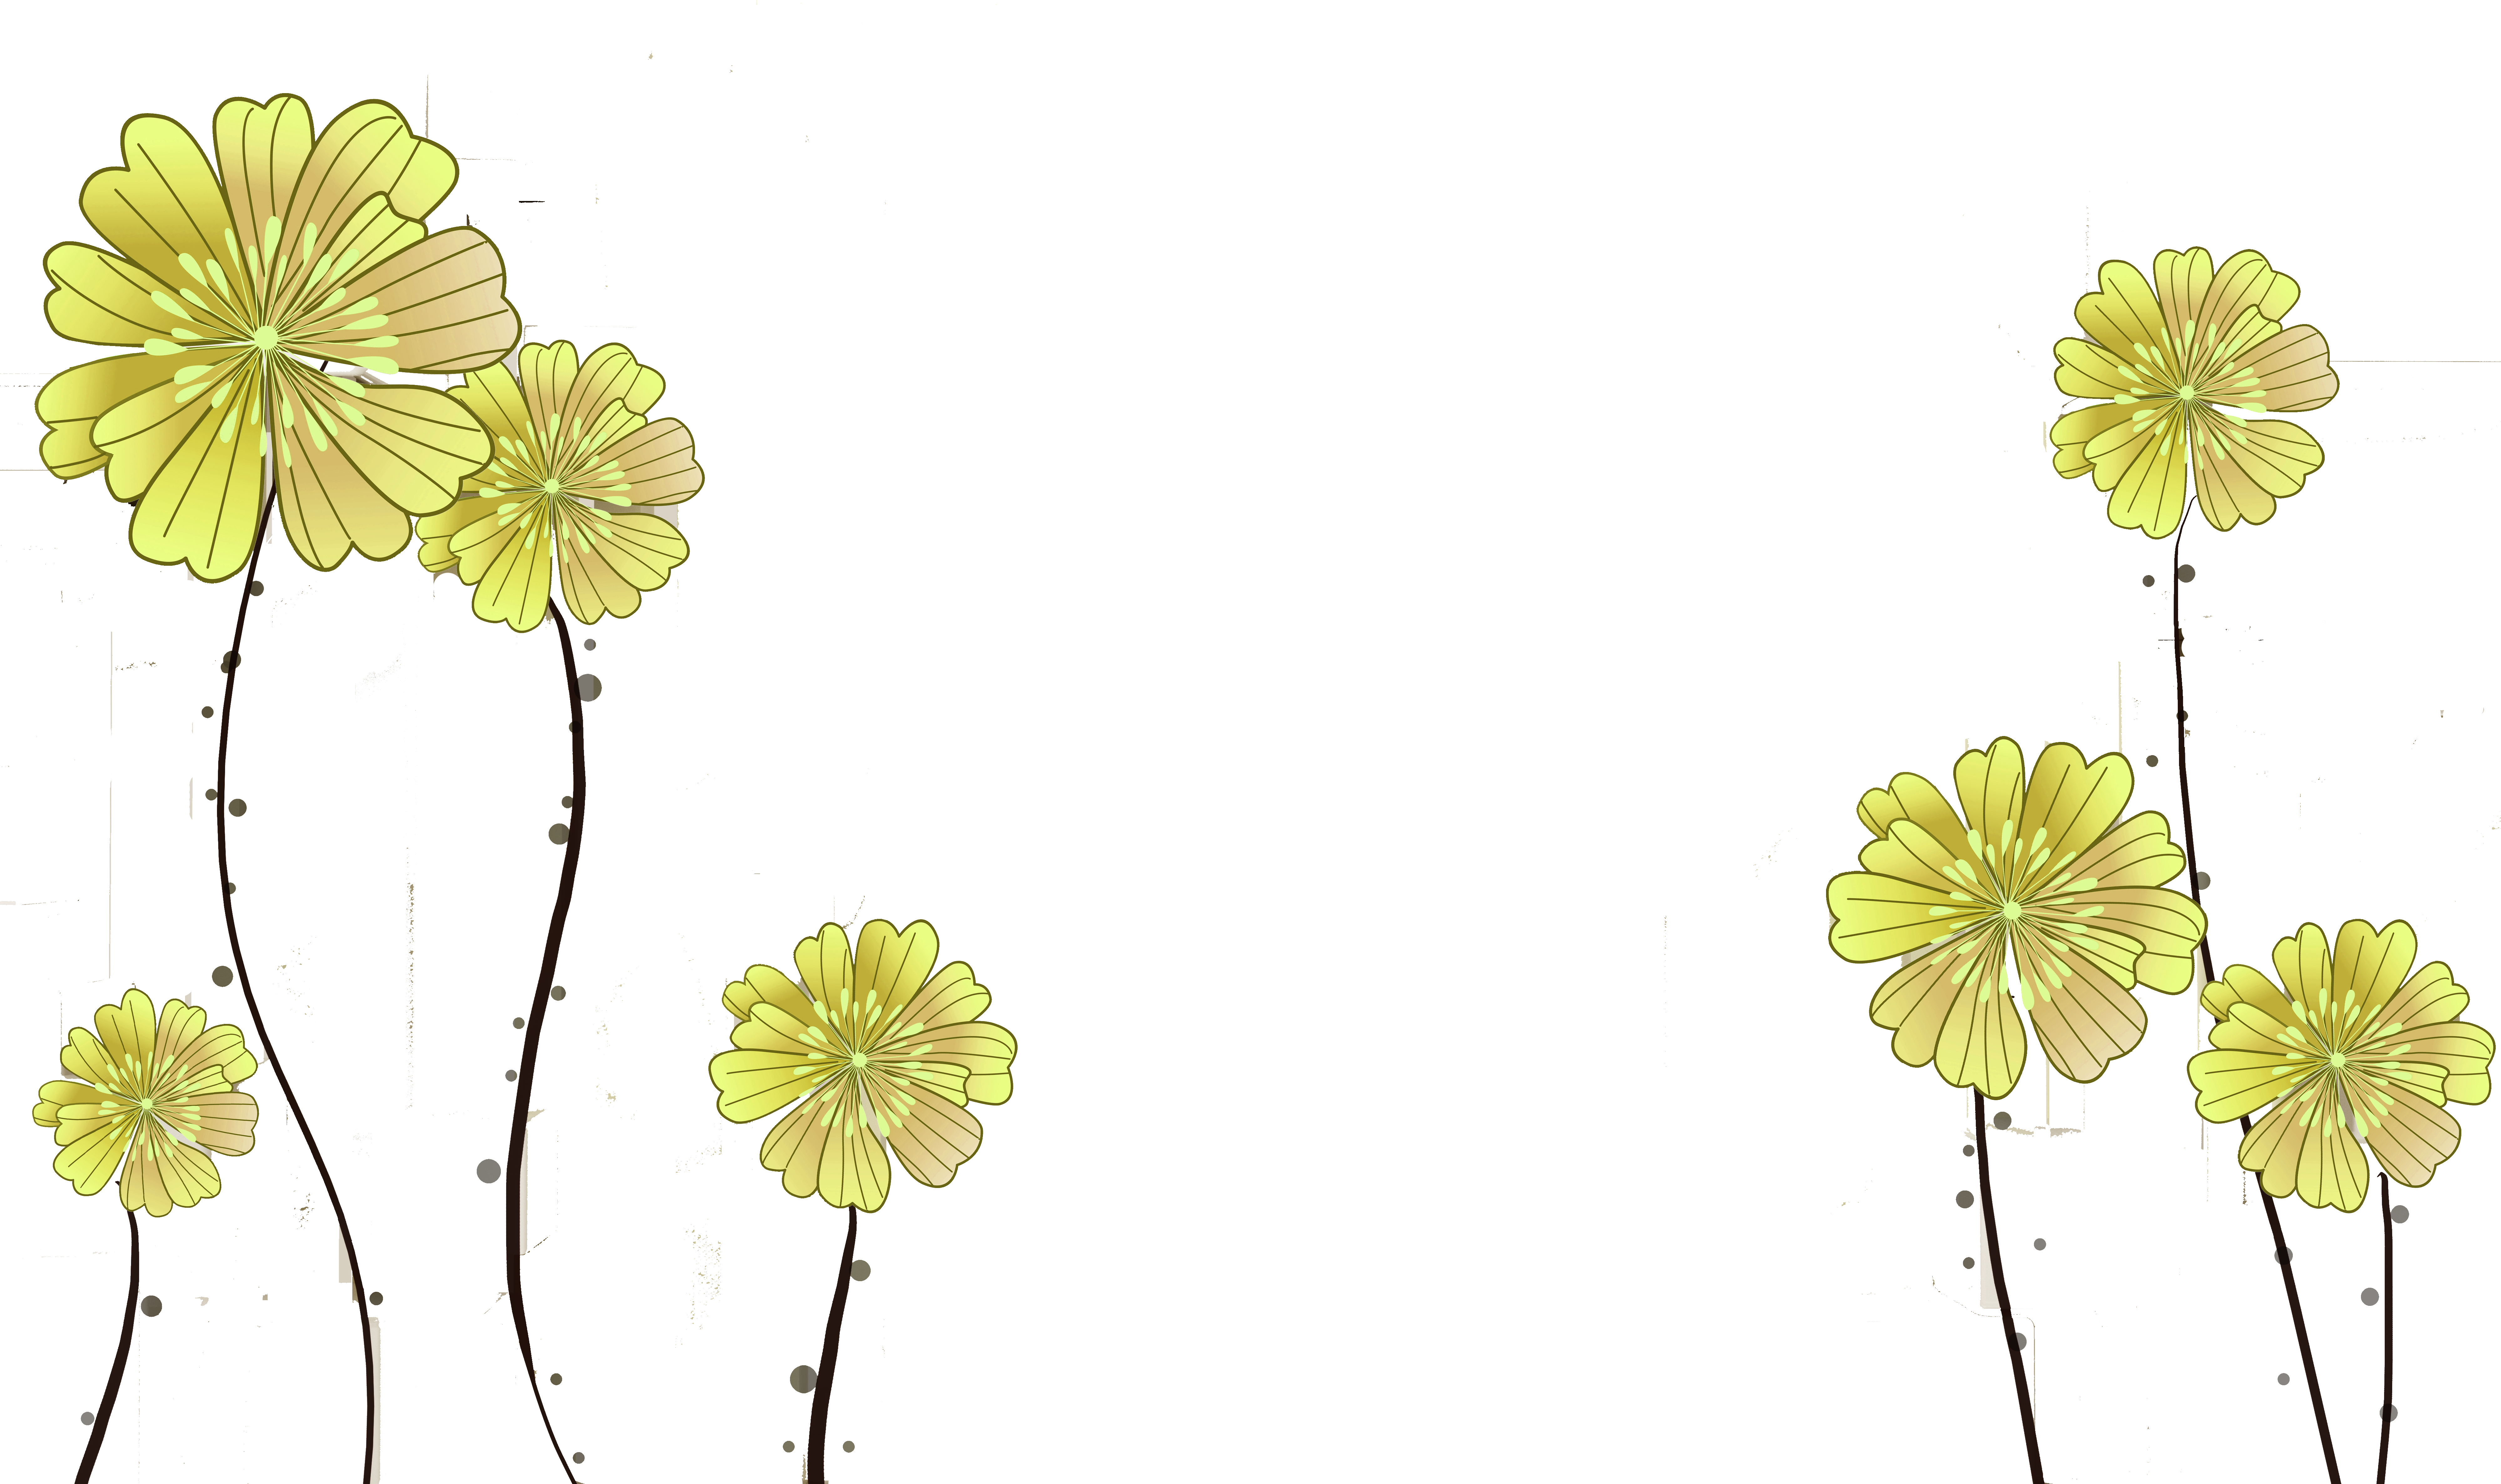 Floral Design Flower Yellow Three Dimensional Space - Artificial Flower (8000x4748)